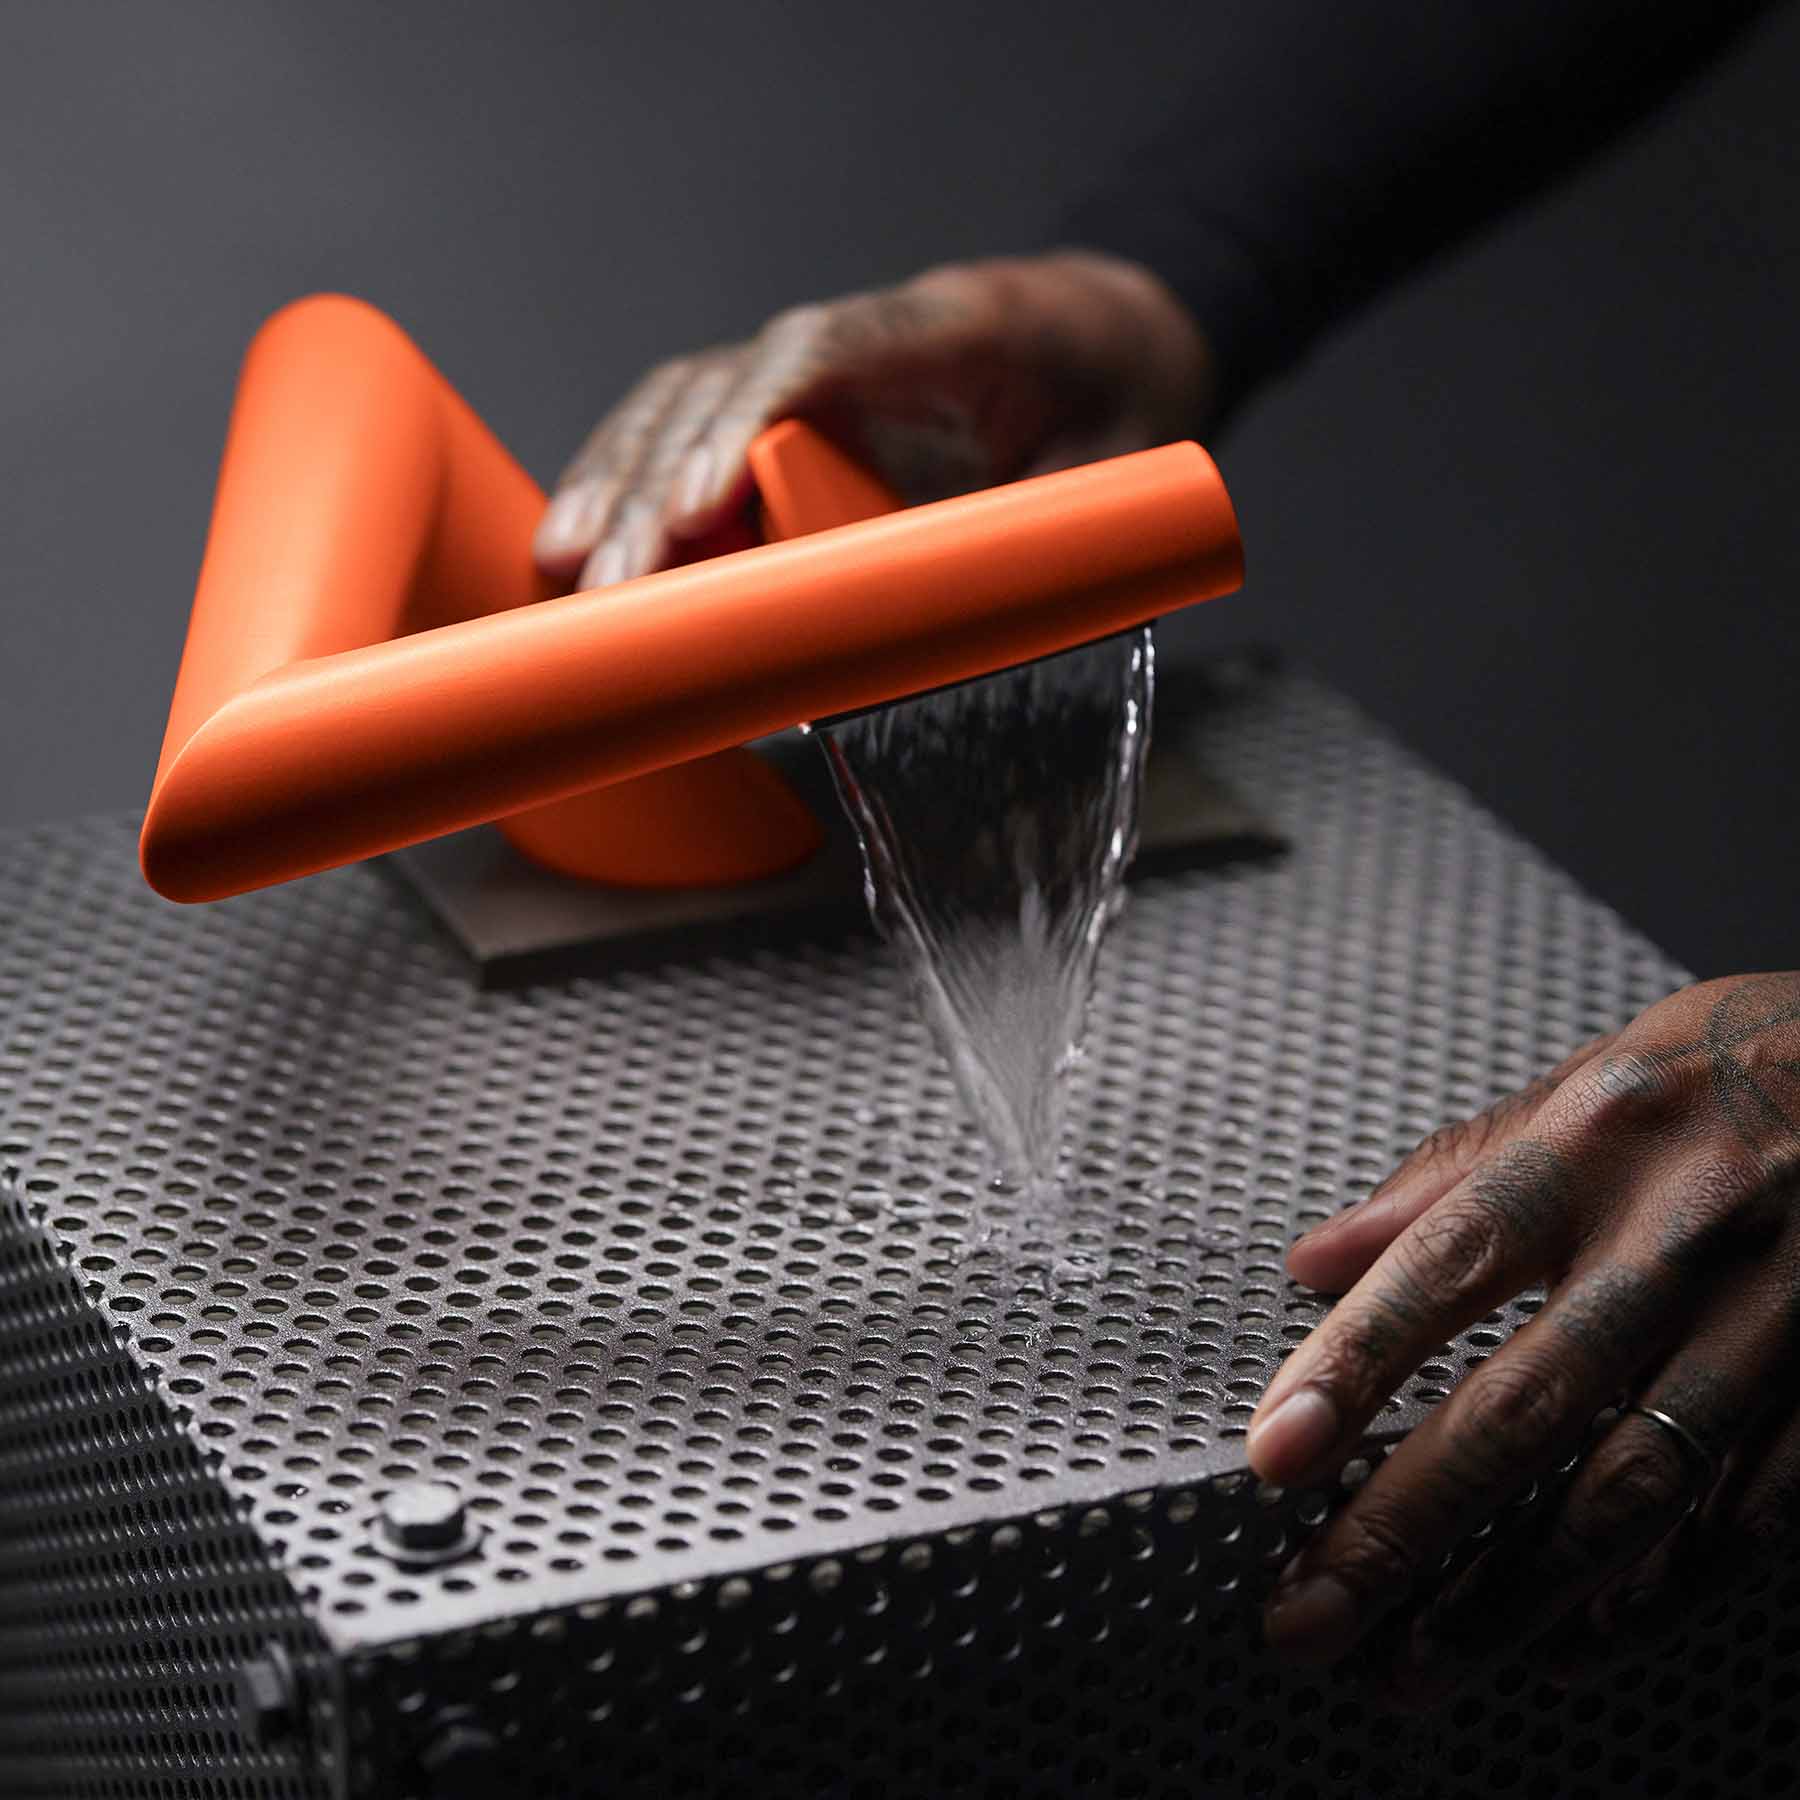 Combining dynamic gesture with advanced engineering, Formation 01 takes a familiar object and reimagines it as a functional sculpture in Kohler's dynamic Neolast composite material.